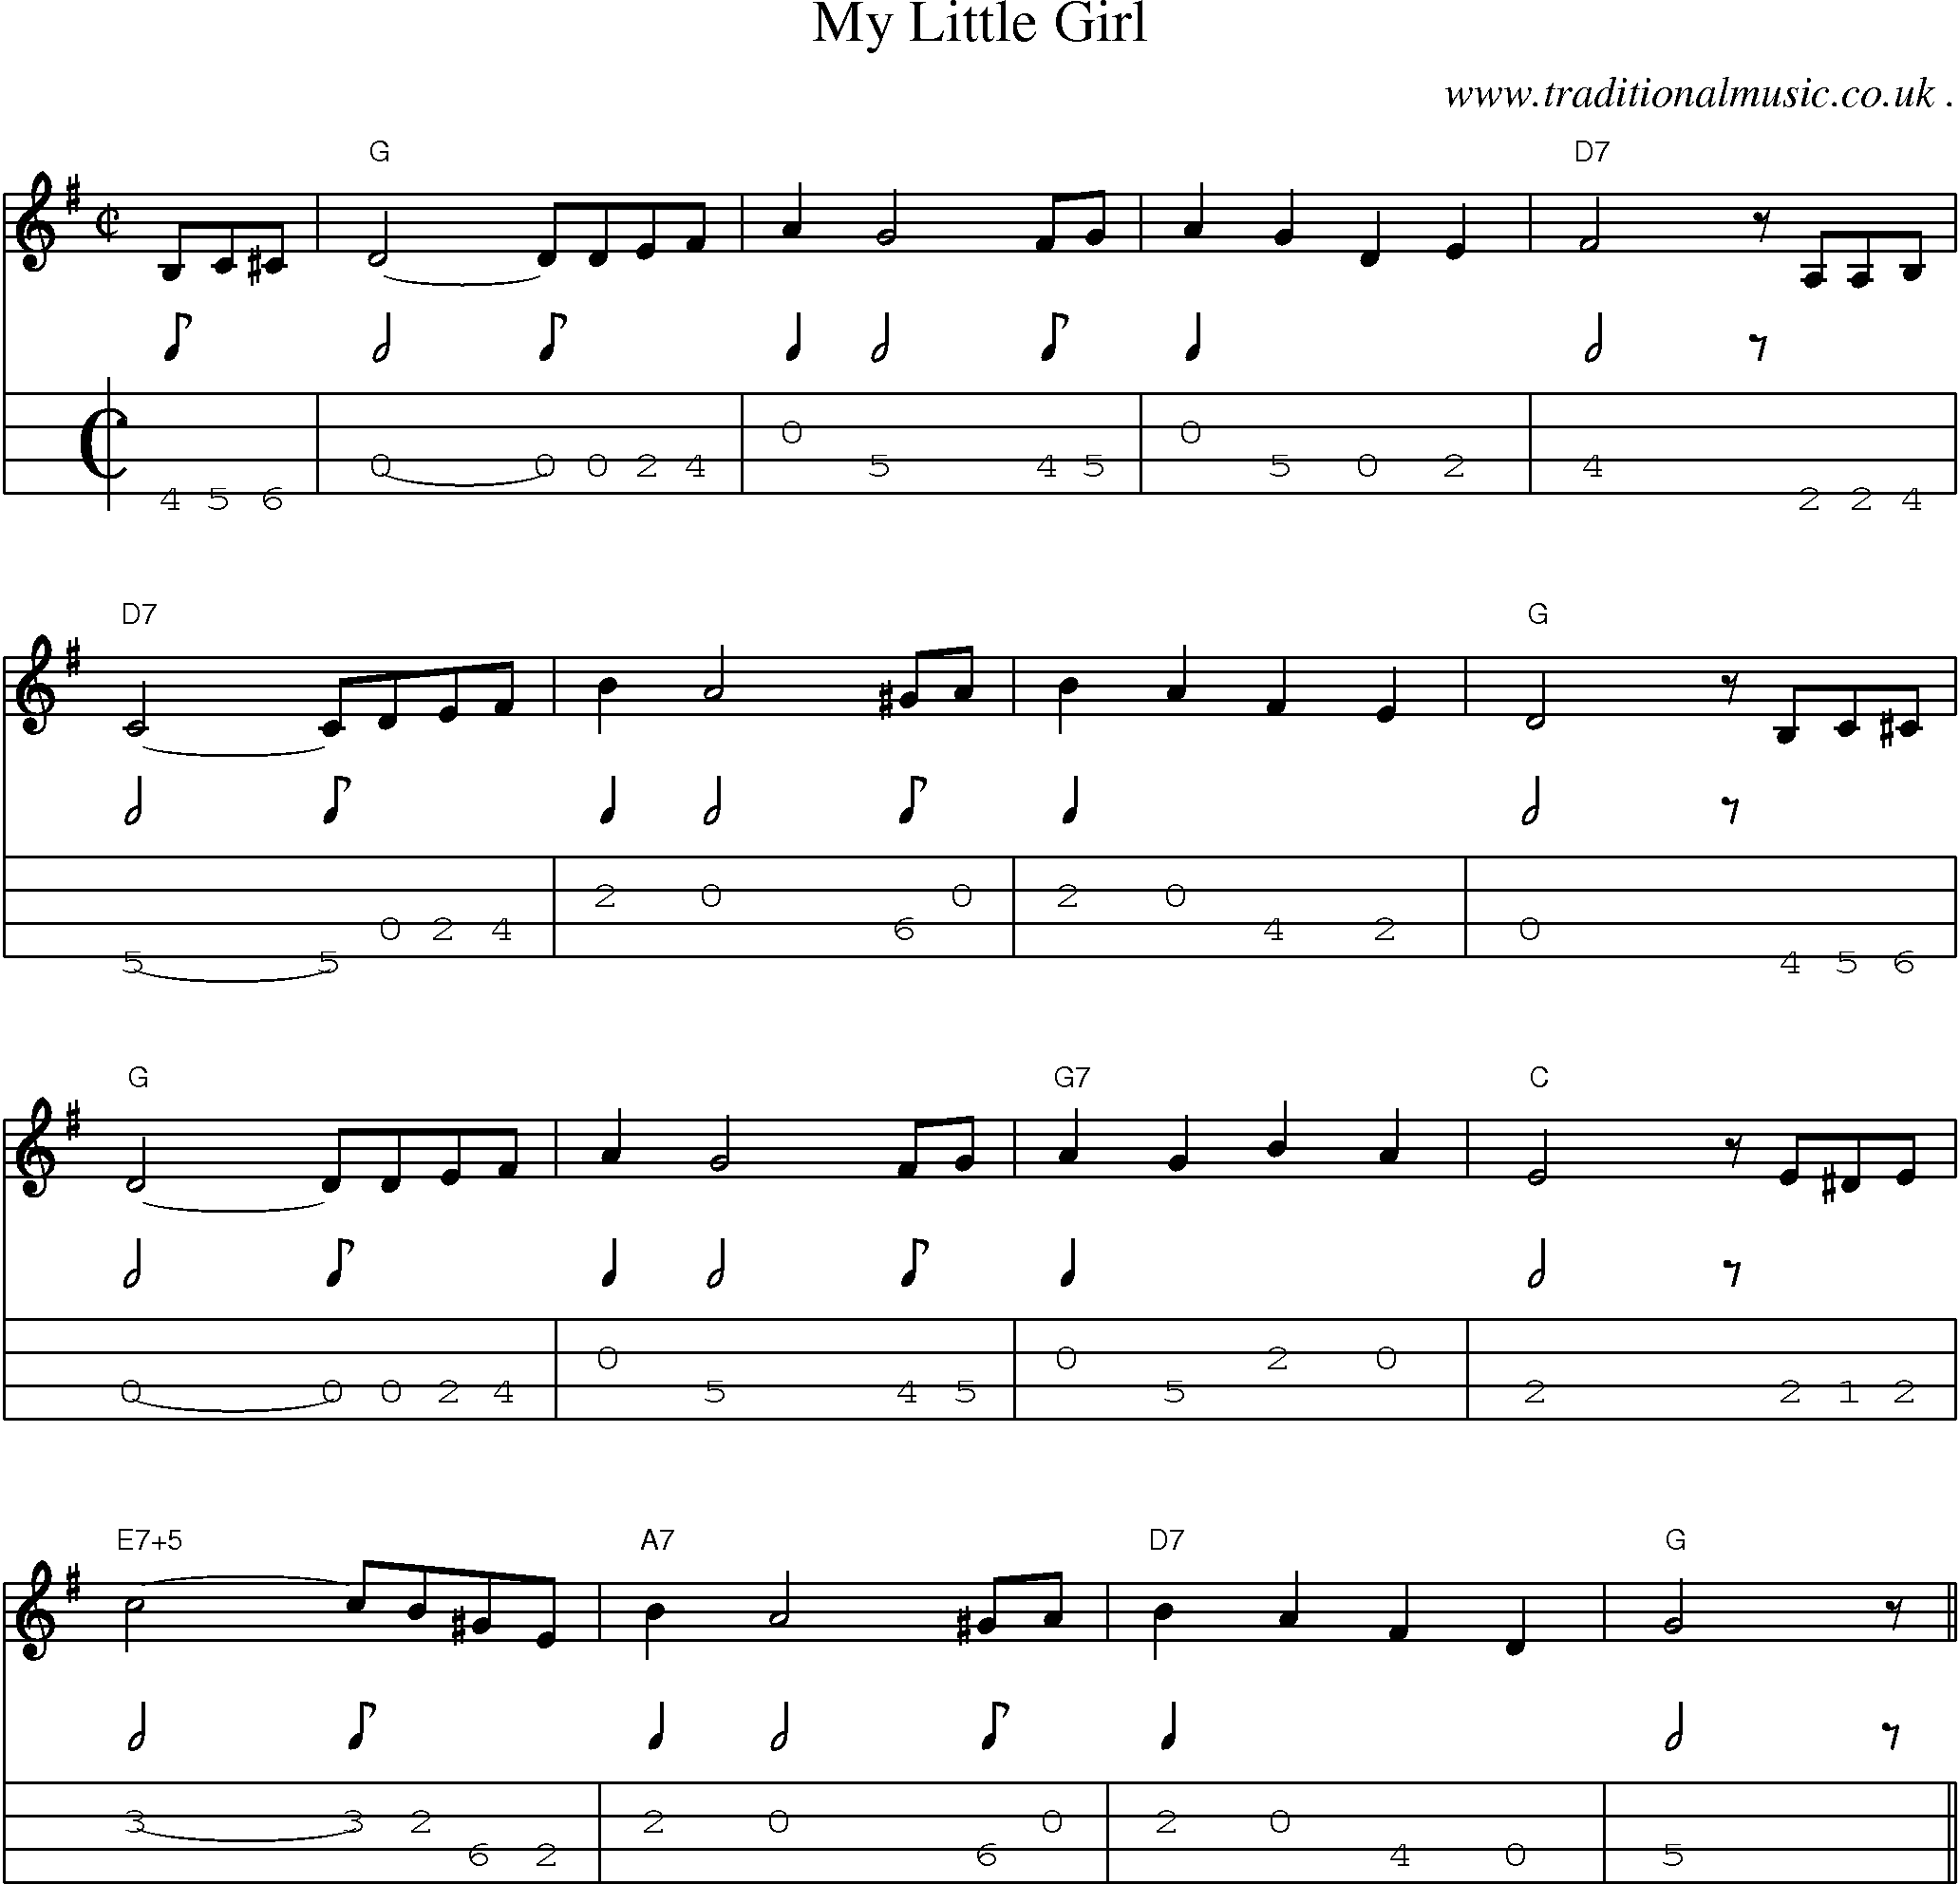 Music Score and Guitar Tabs for My Little Girl